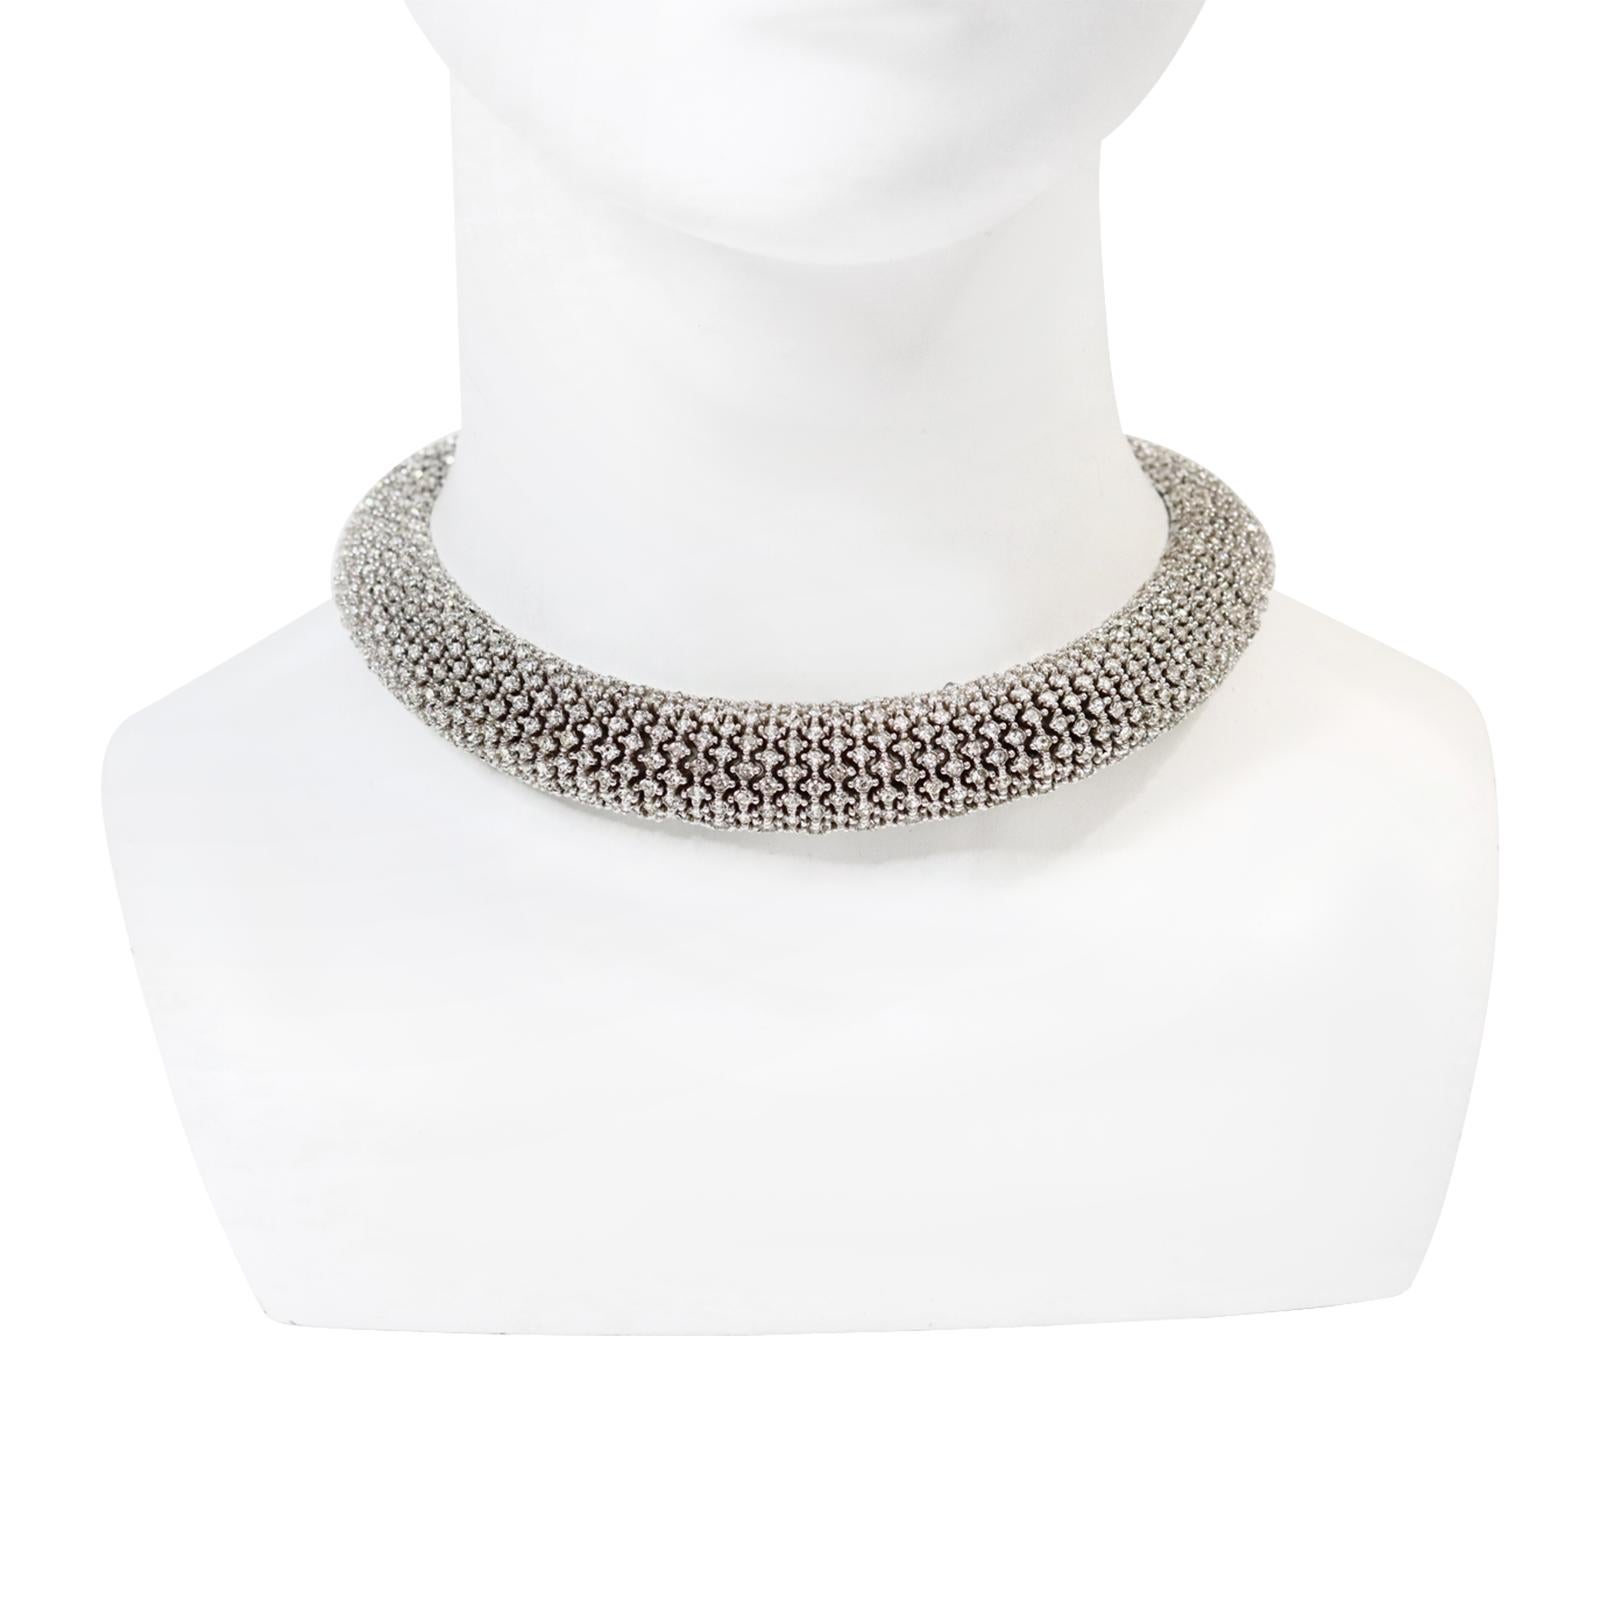 Modern Vintage Ciner Silver Tone Diamante Rounded Choker Necklace Circa 1980s For Sale